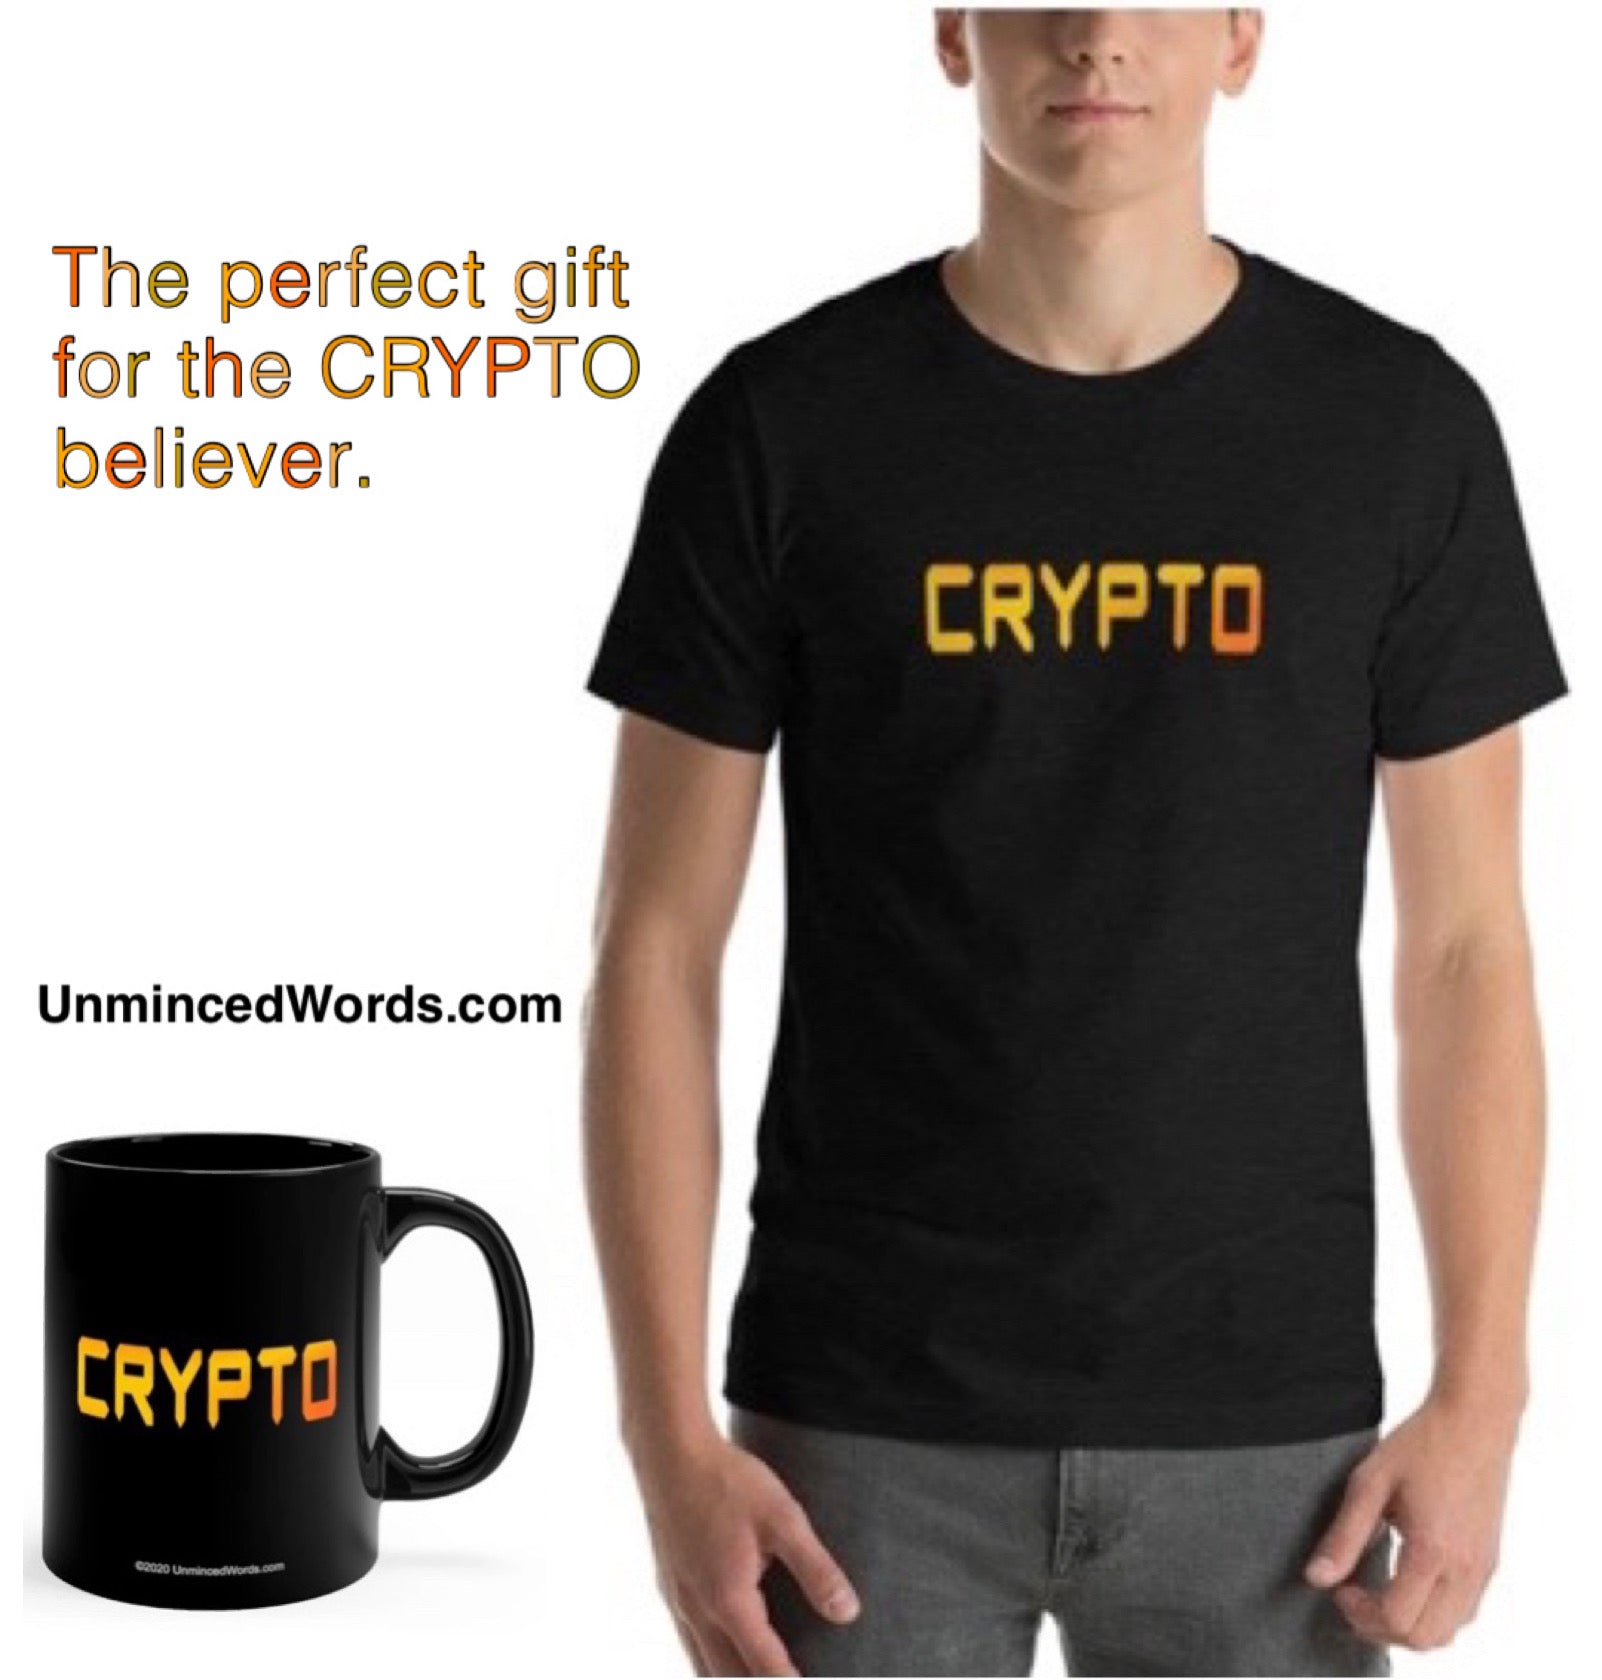 This CRYPTO shirt is good luck.